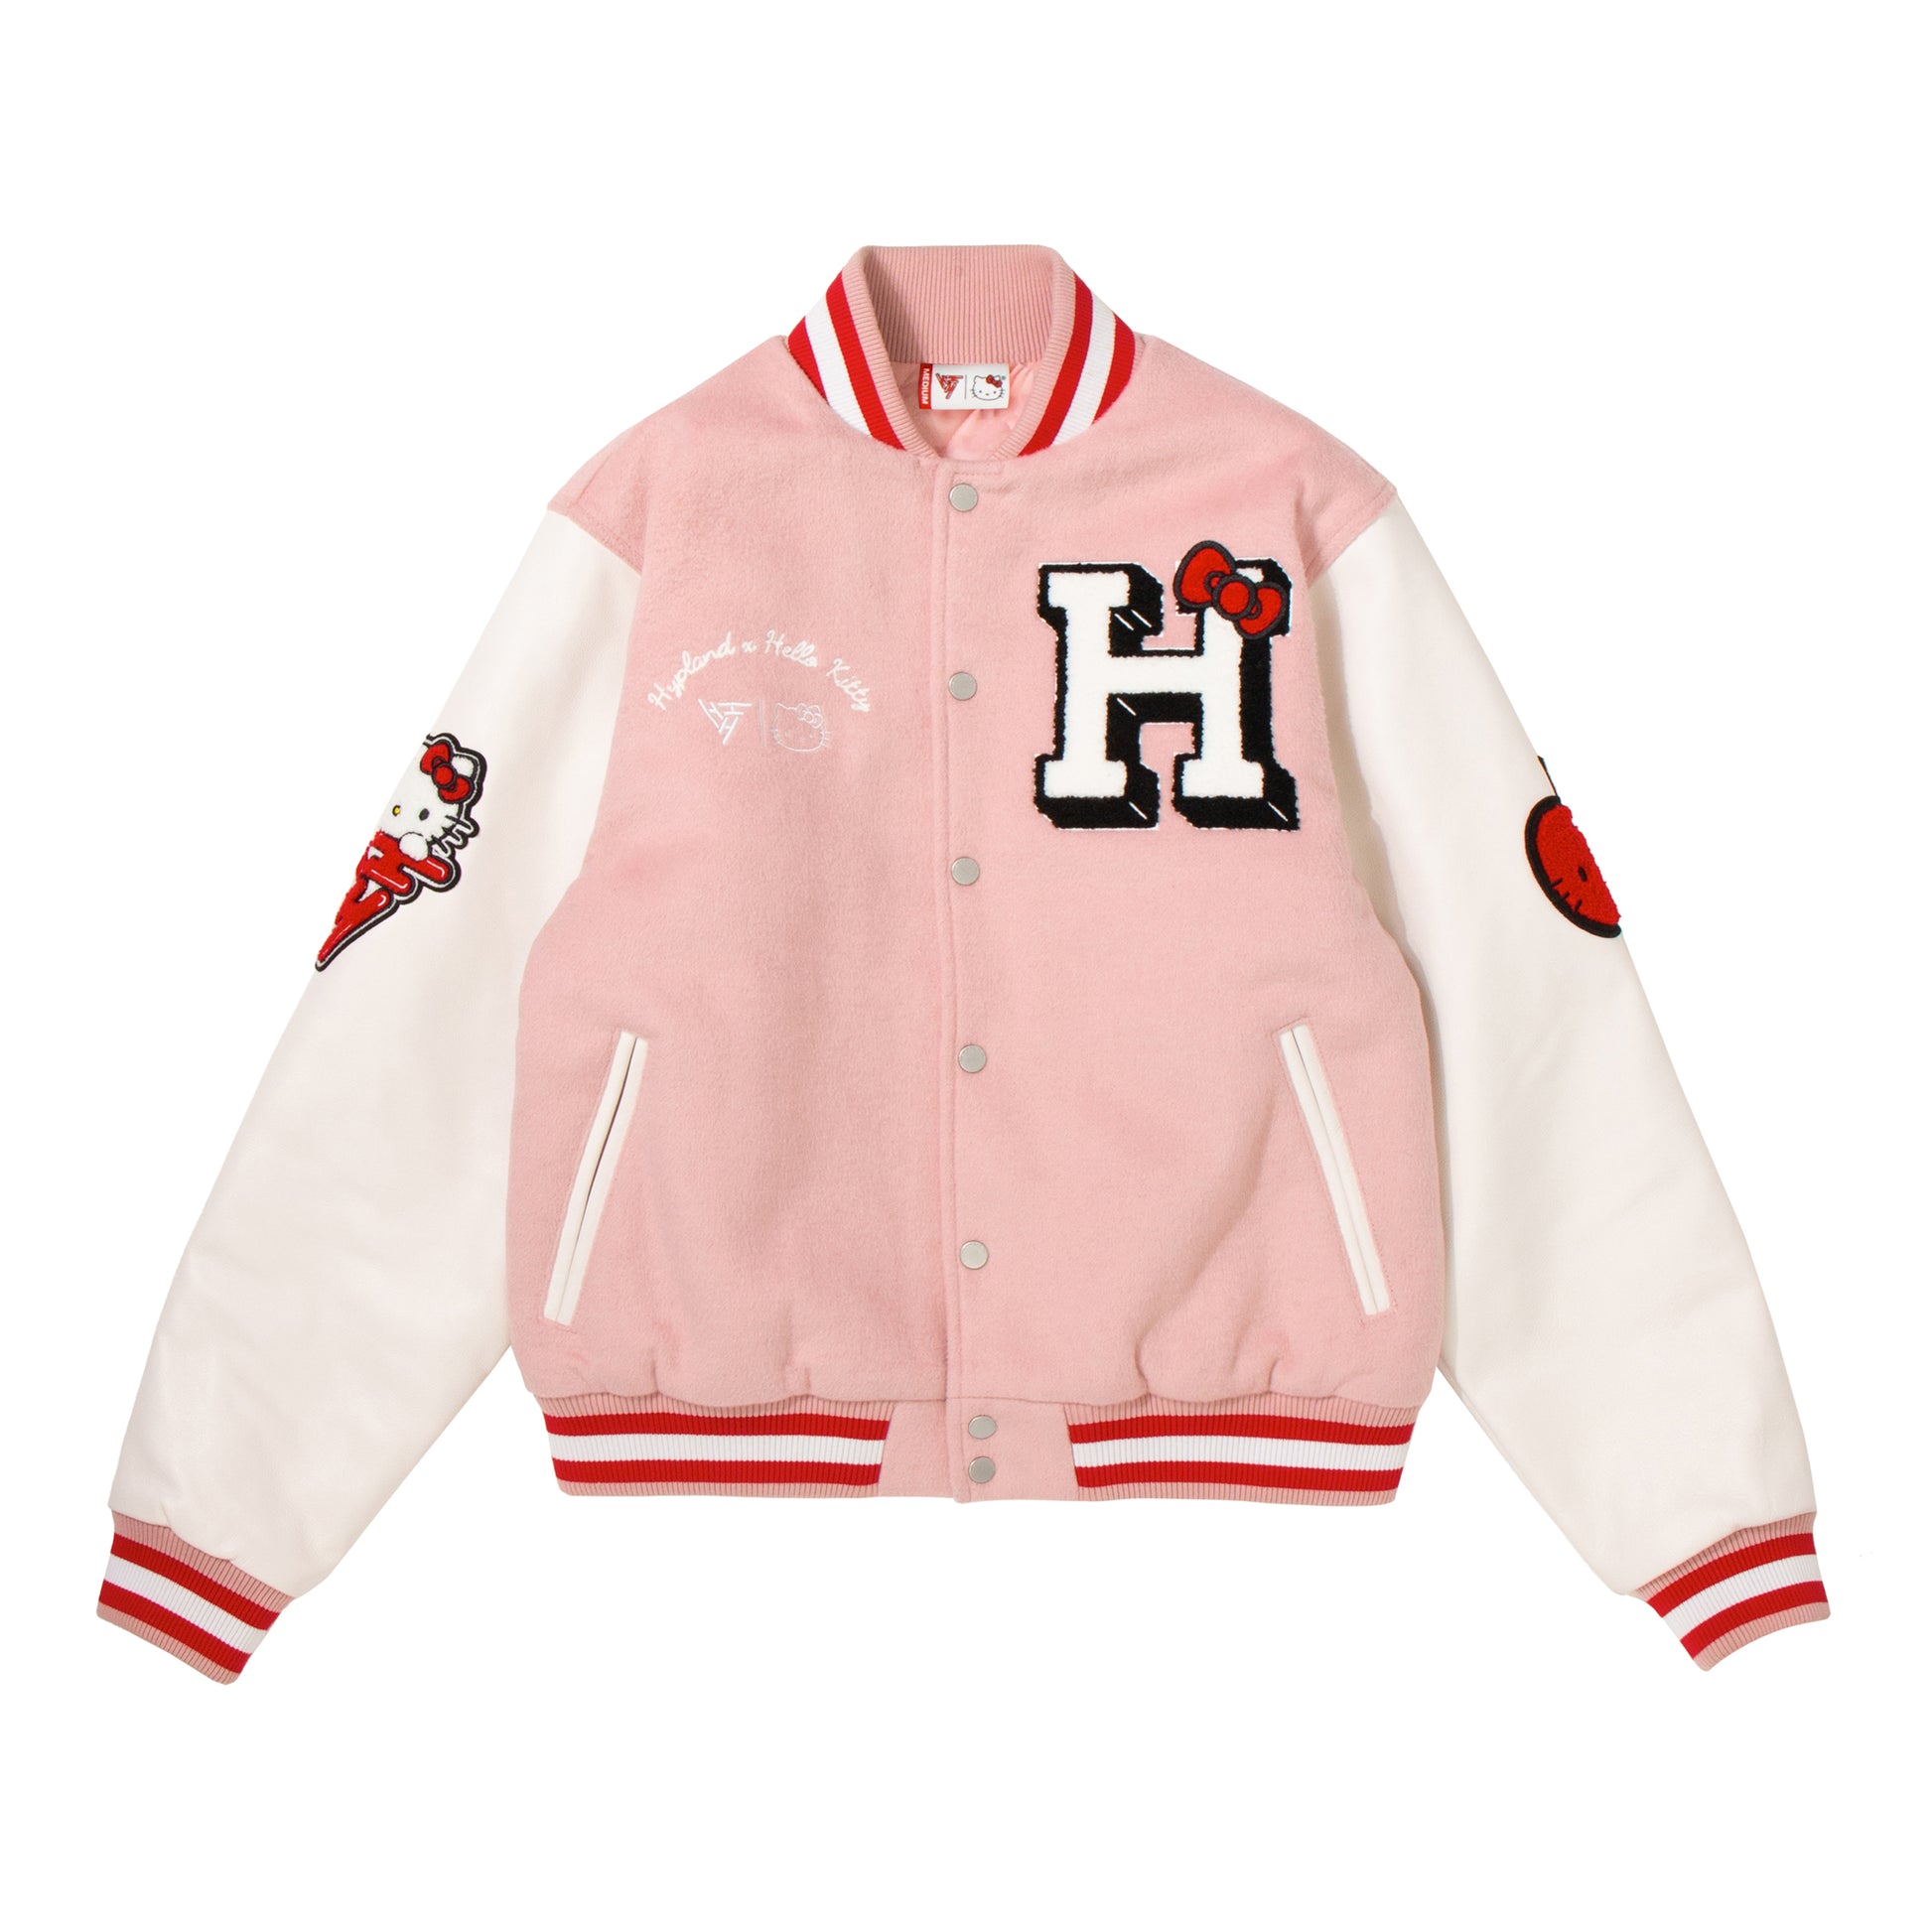 Buy TAYO - >>Hello Kitty Hooded Jacket for adult<< Size